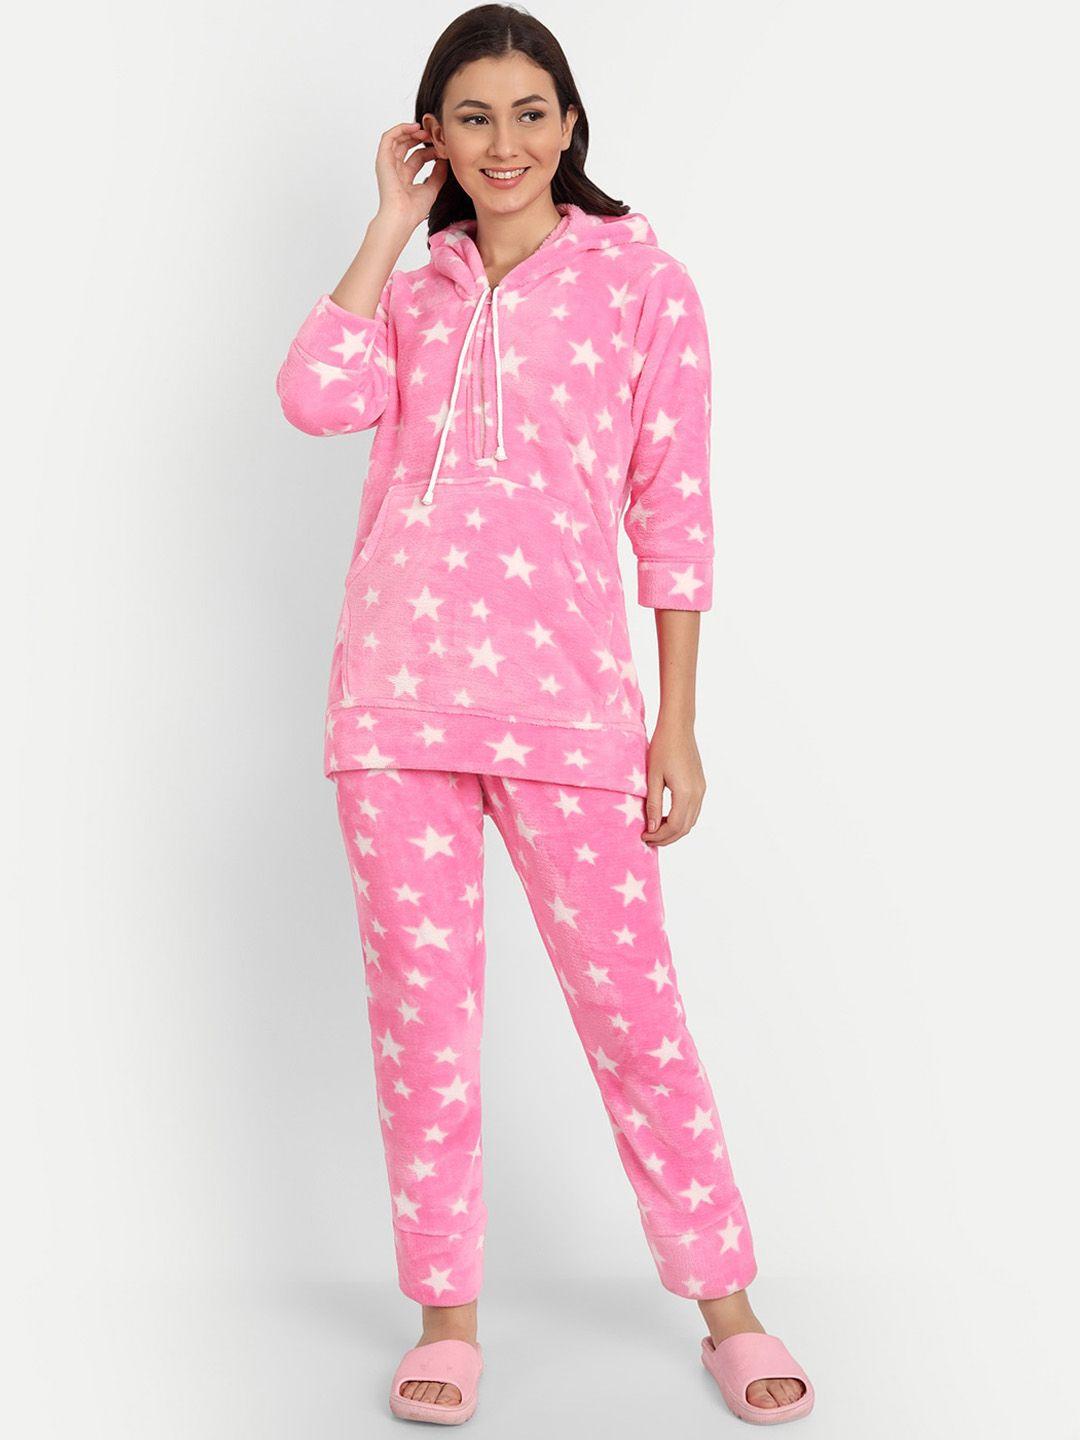 palival-women-pink-&-white-printed-night-suit-with-hood